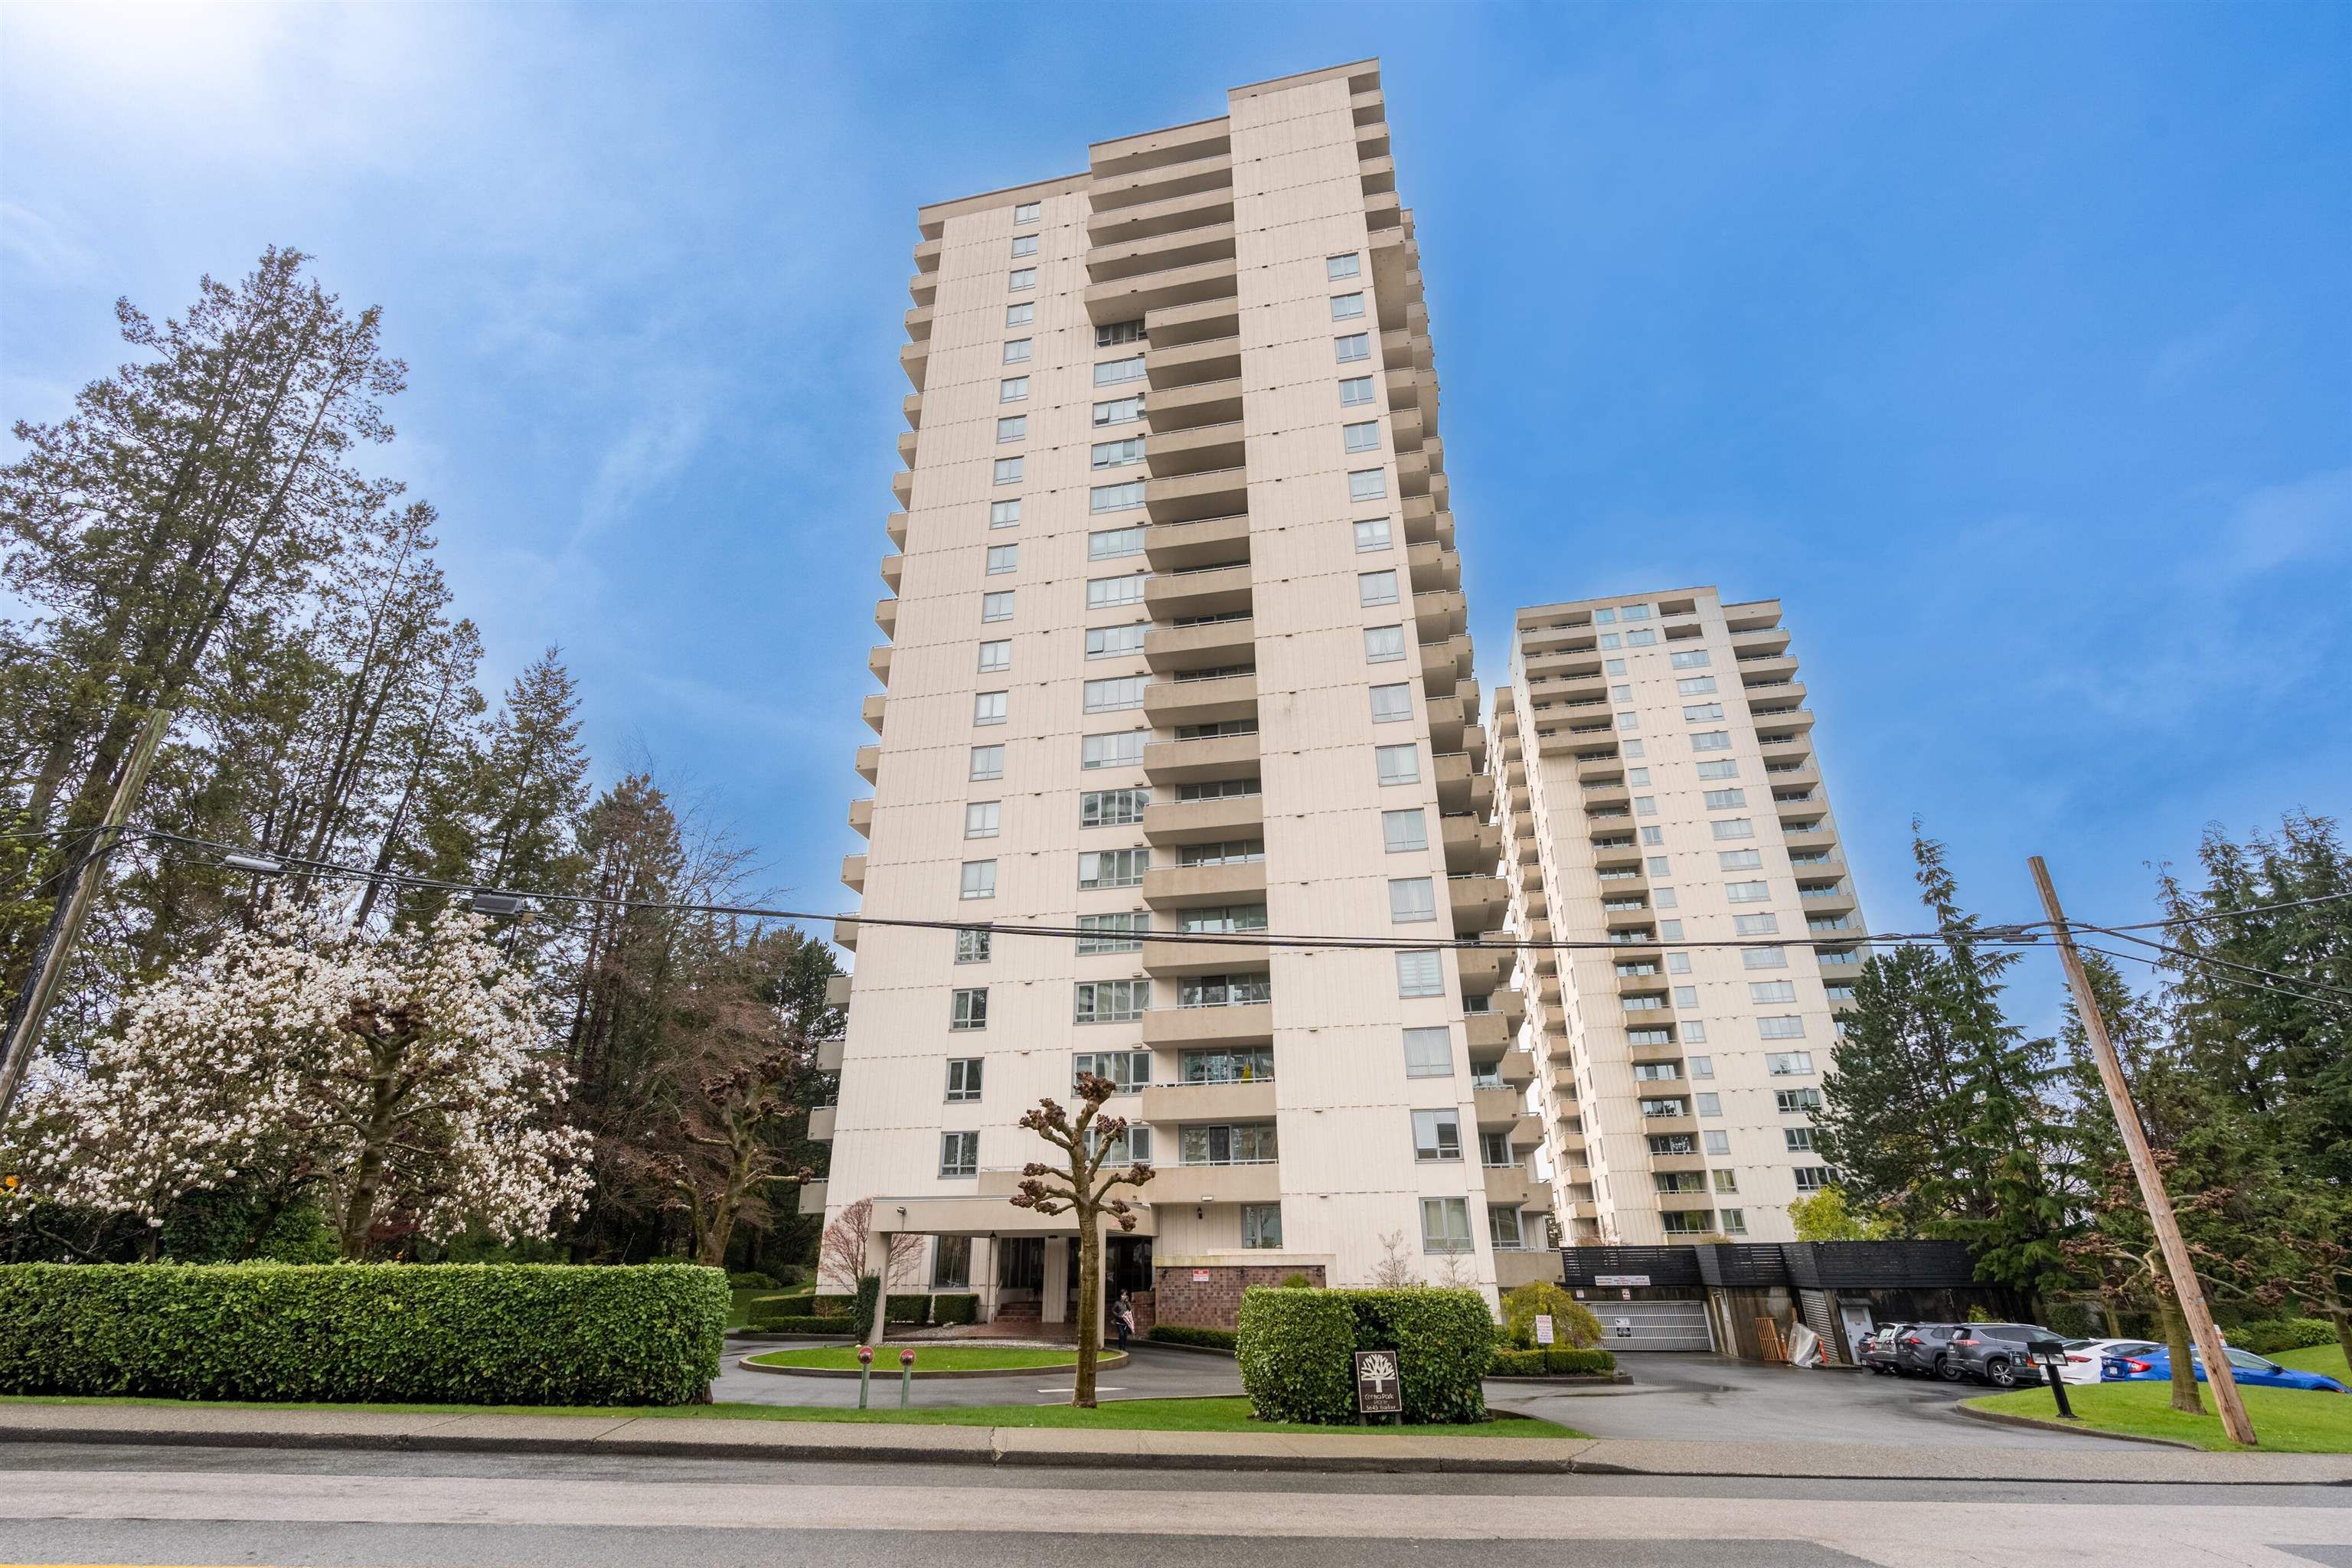 Just sold a property at 805 5645 BARKER AVE in Burnaby